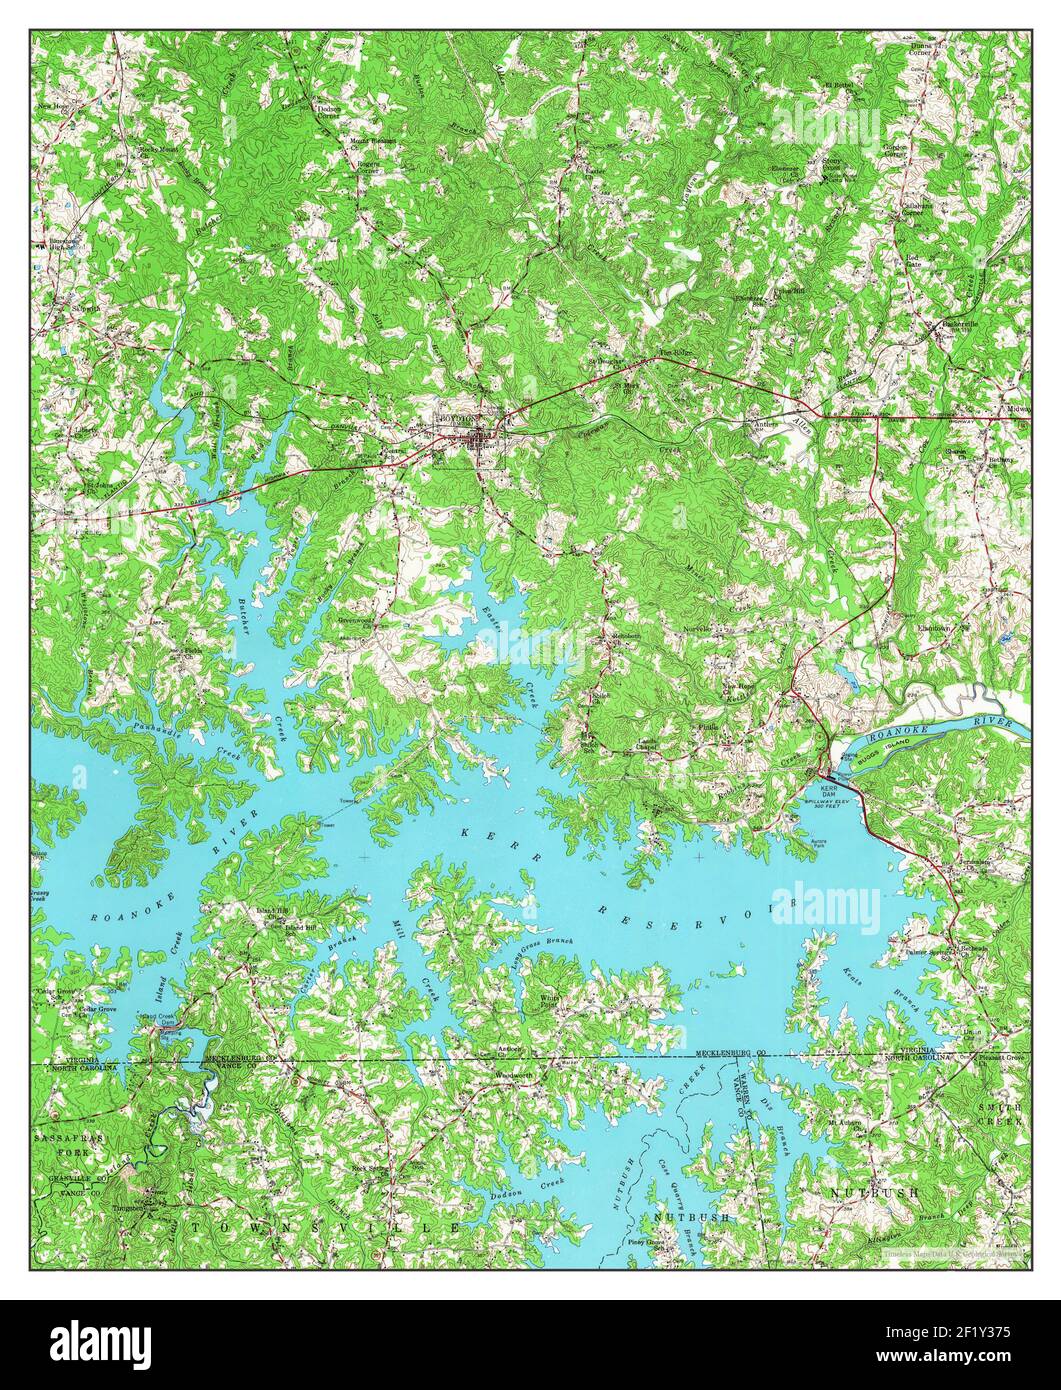 Boydton, Virginia, map 1955, 1:62500, United States of America by Timeless Maps, data U.S. Geological Survey Stock Photo